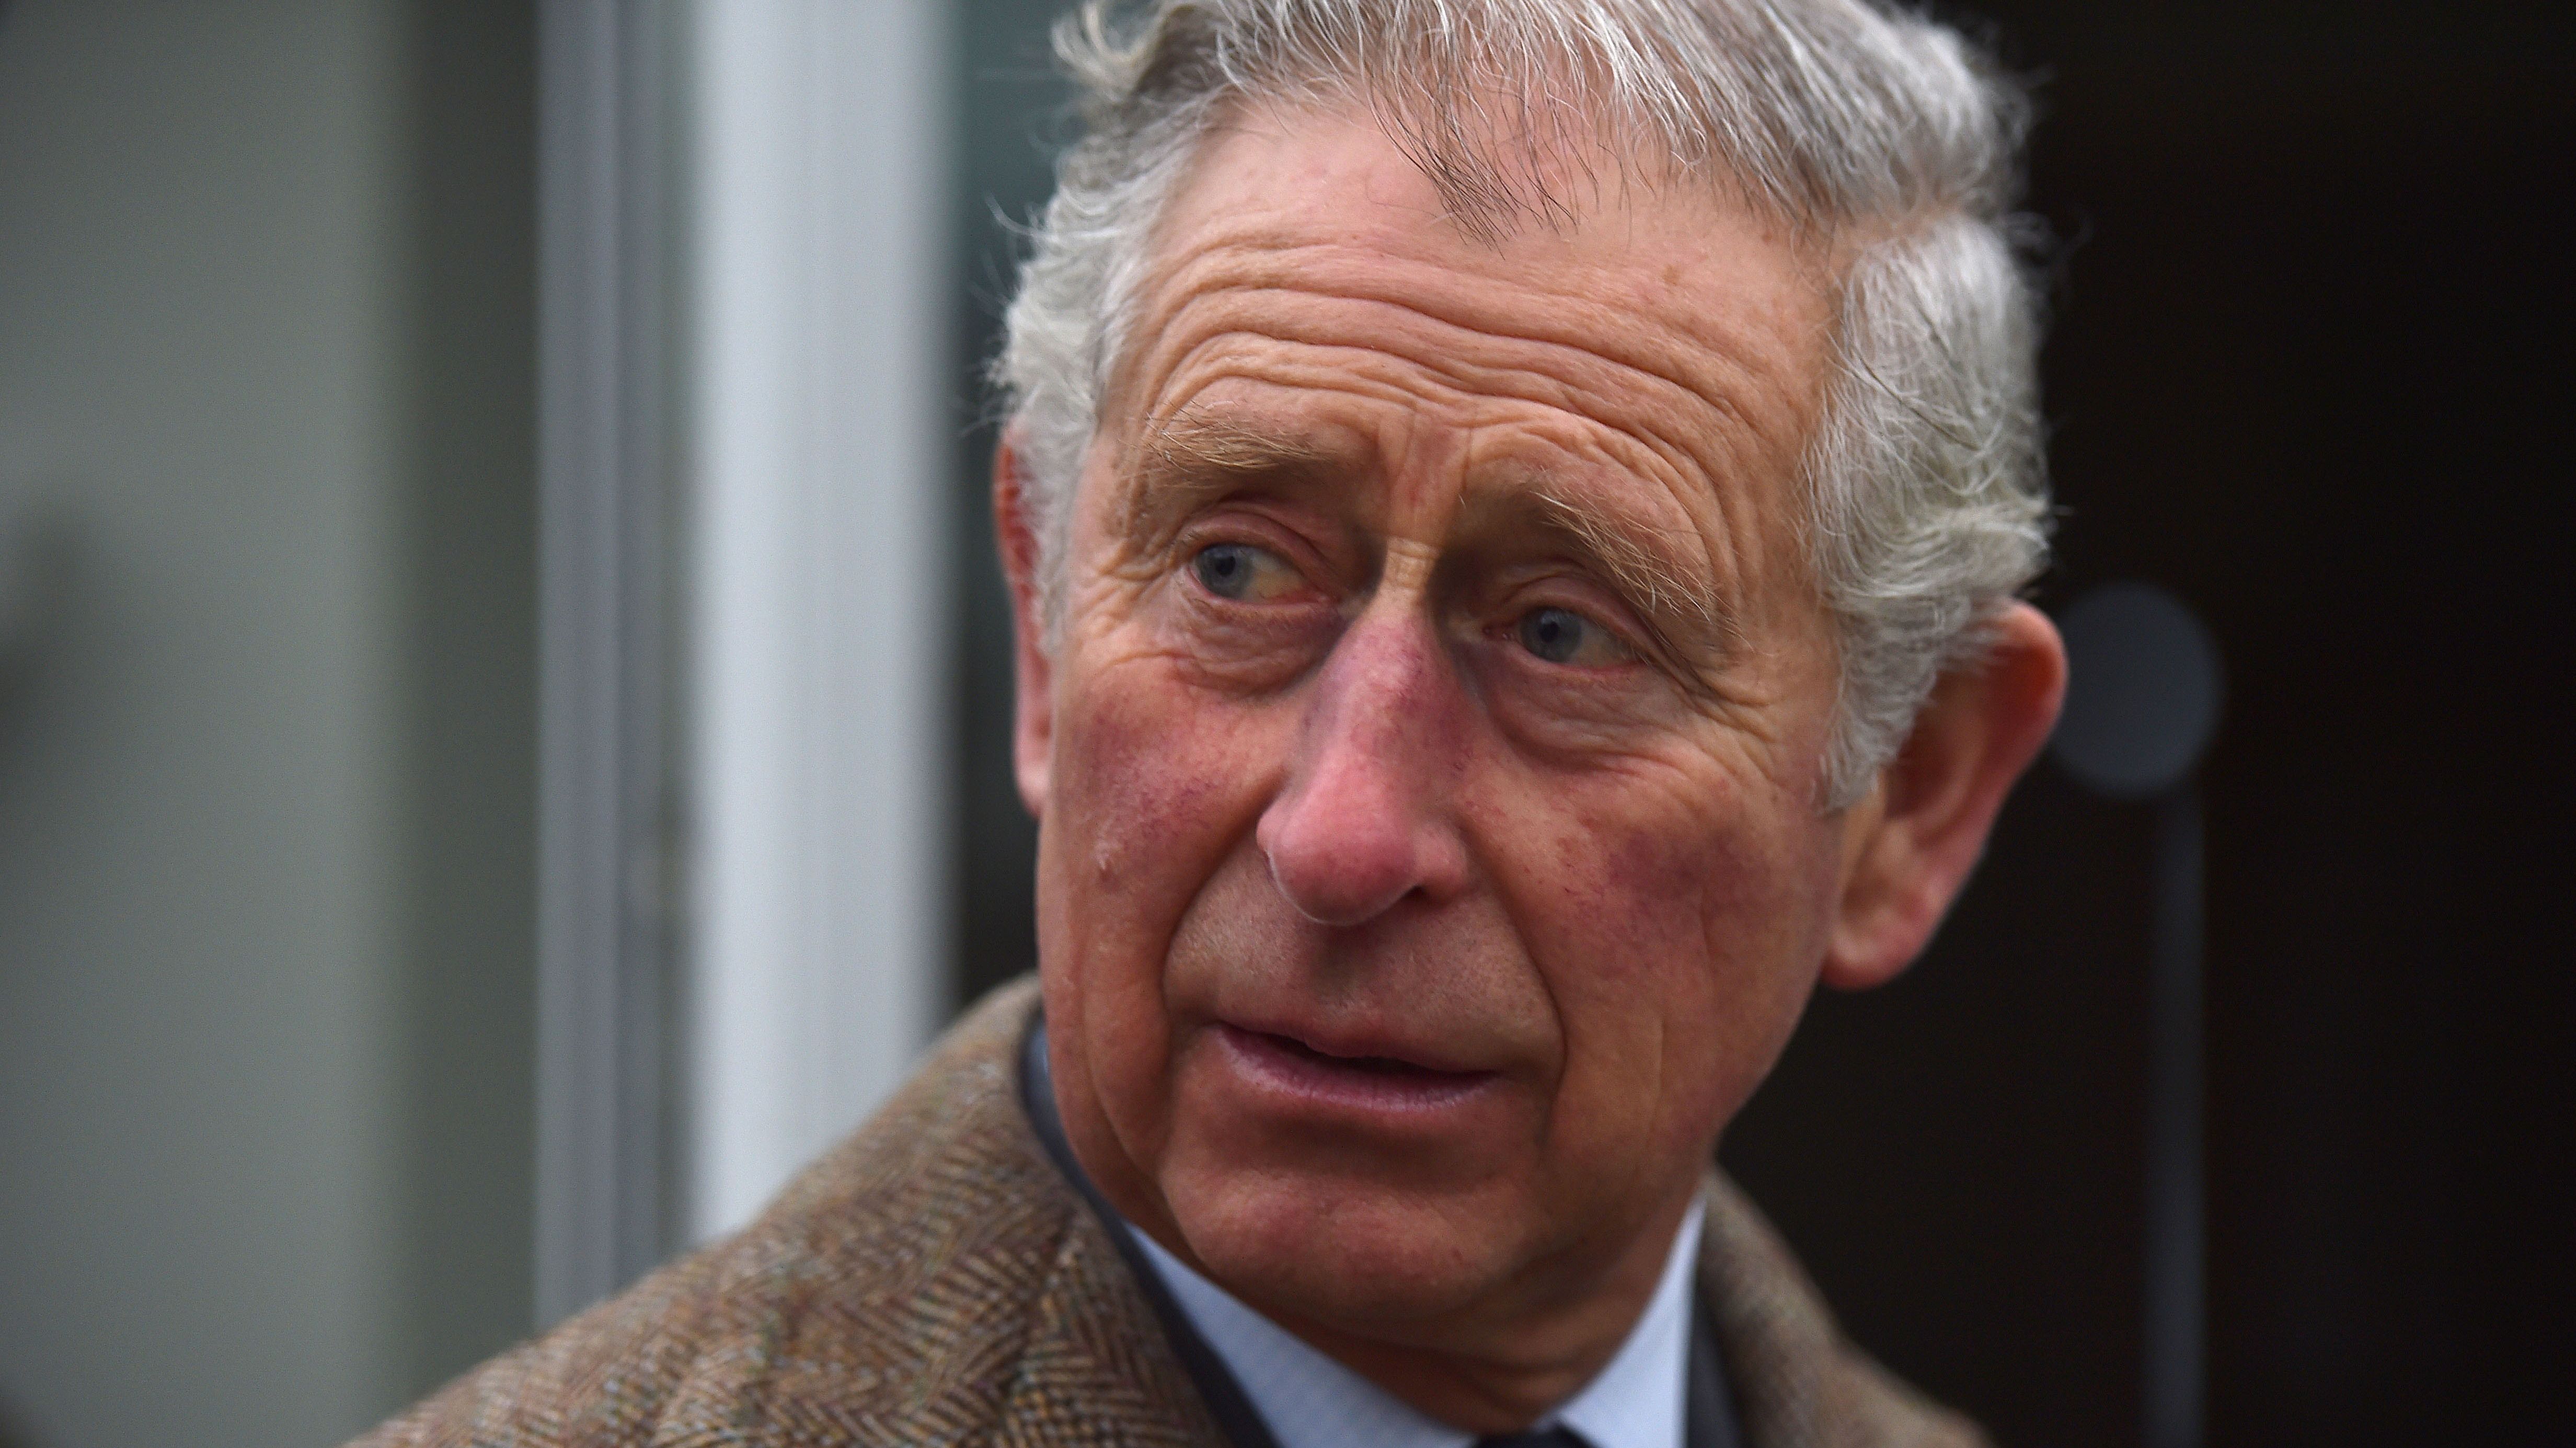 Prince Charles Wallpaper Image Photo Picture Background